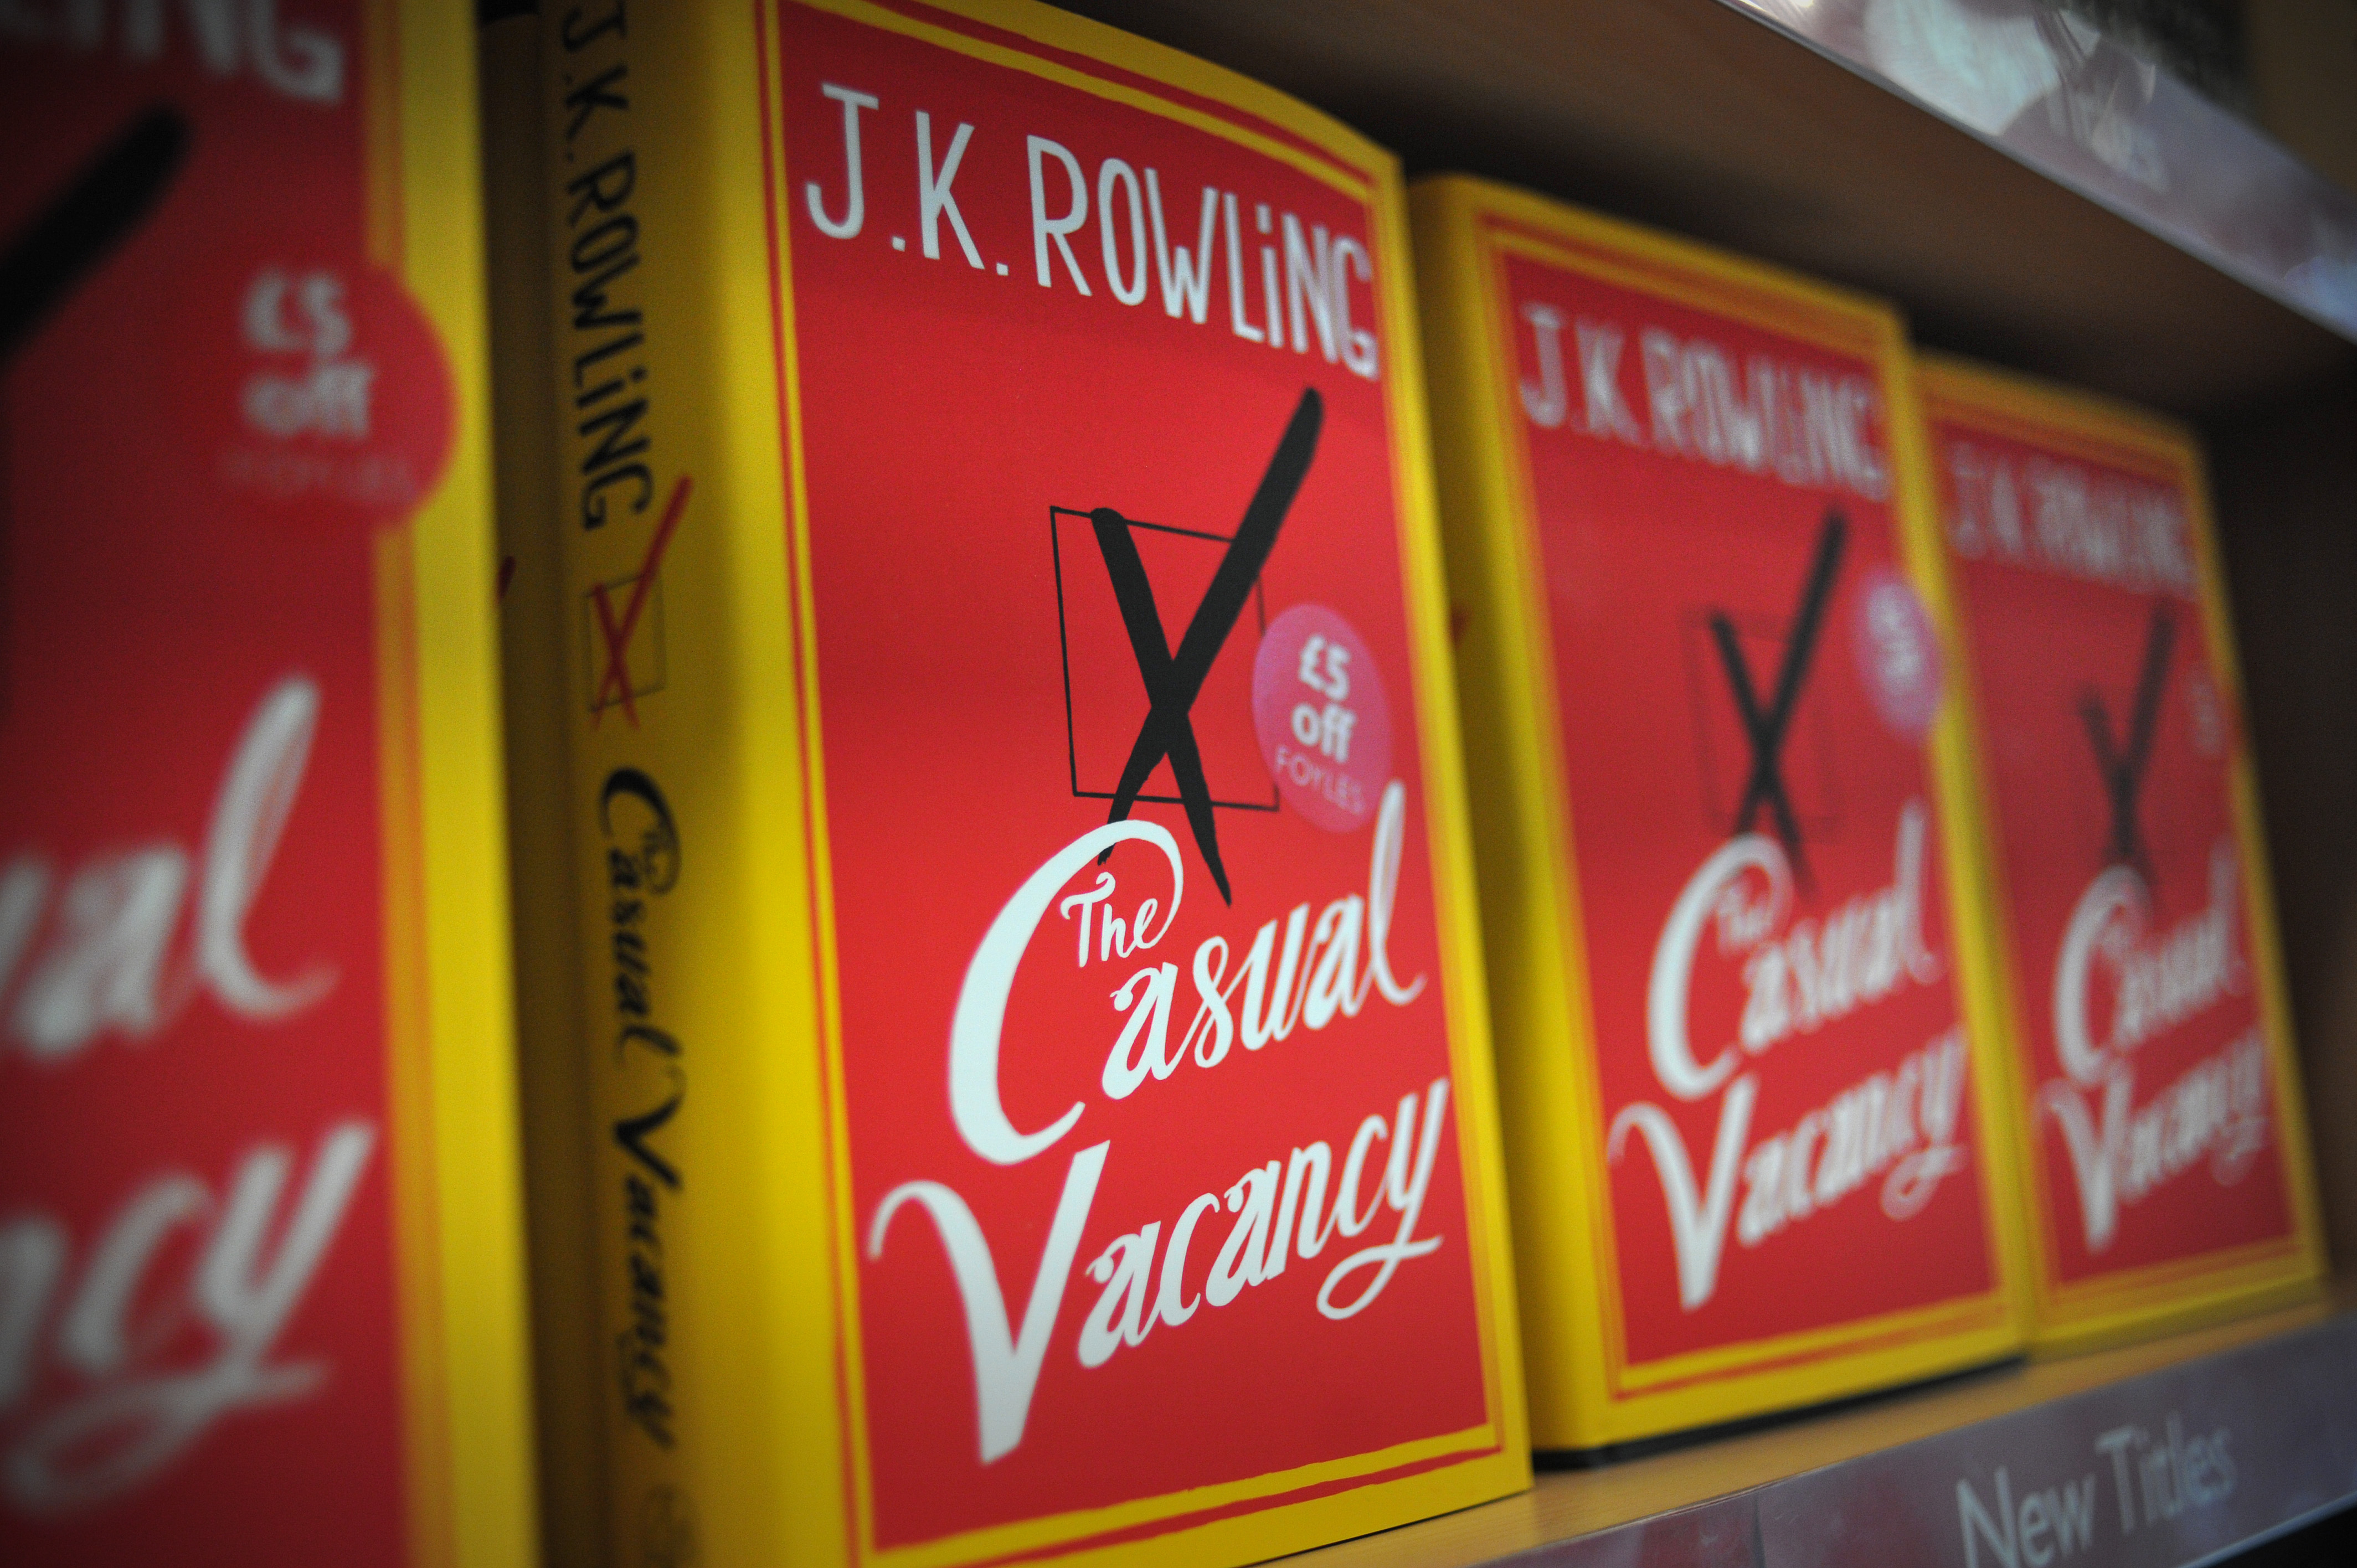 jk rowling the casual vacancy first edition